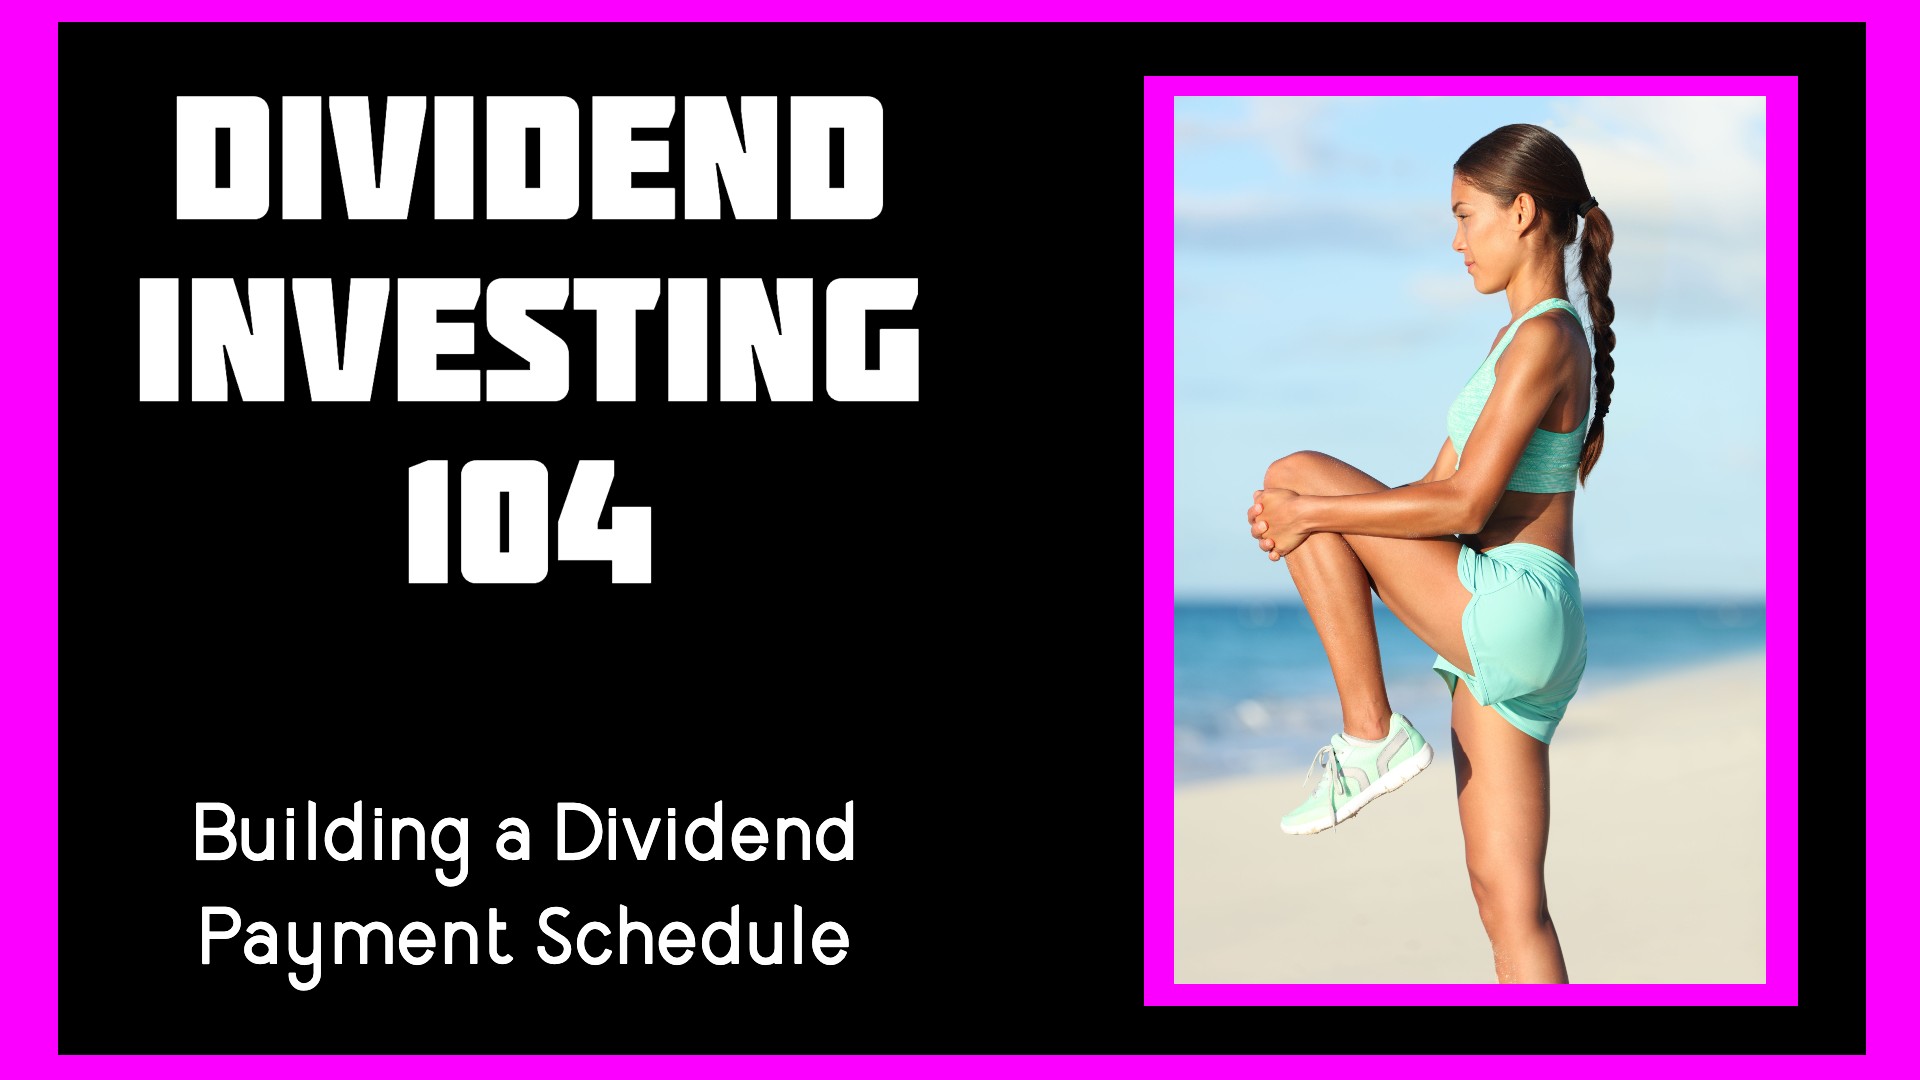 Dividend Investing 104 Payment Schedule